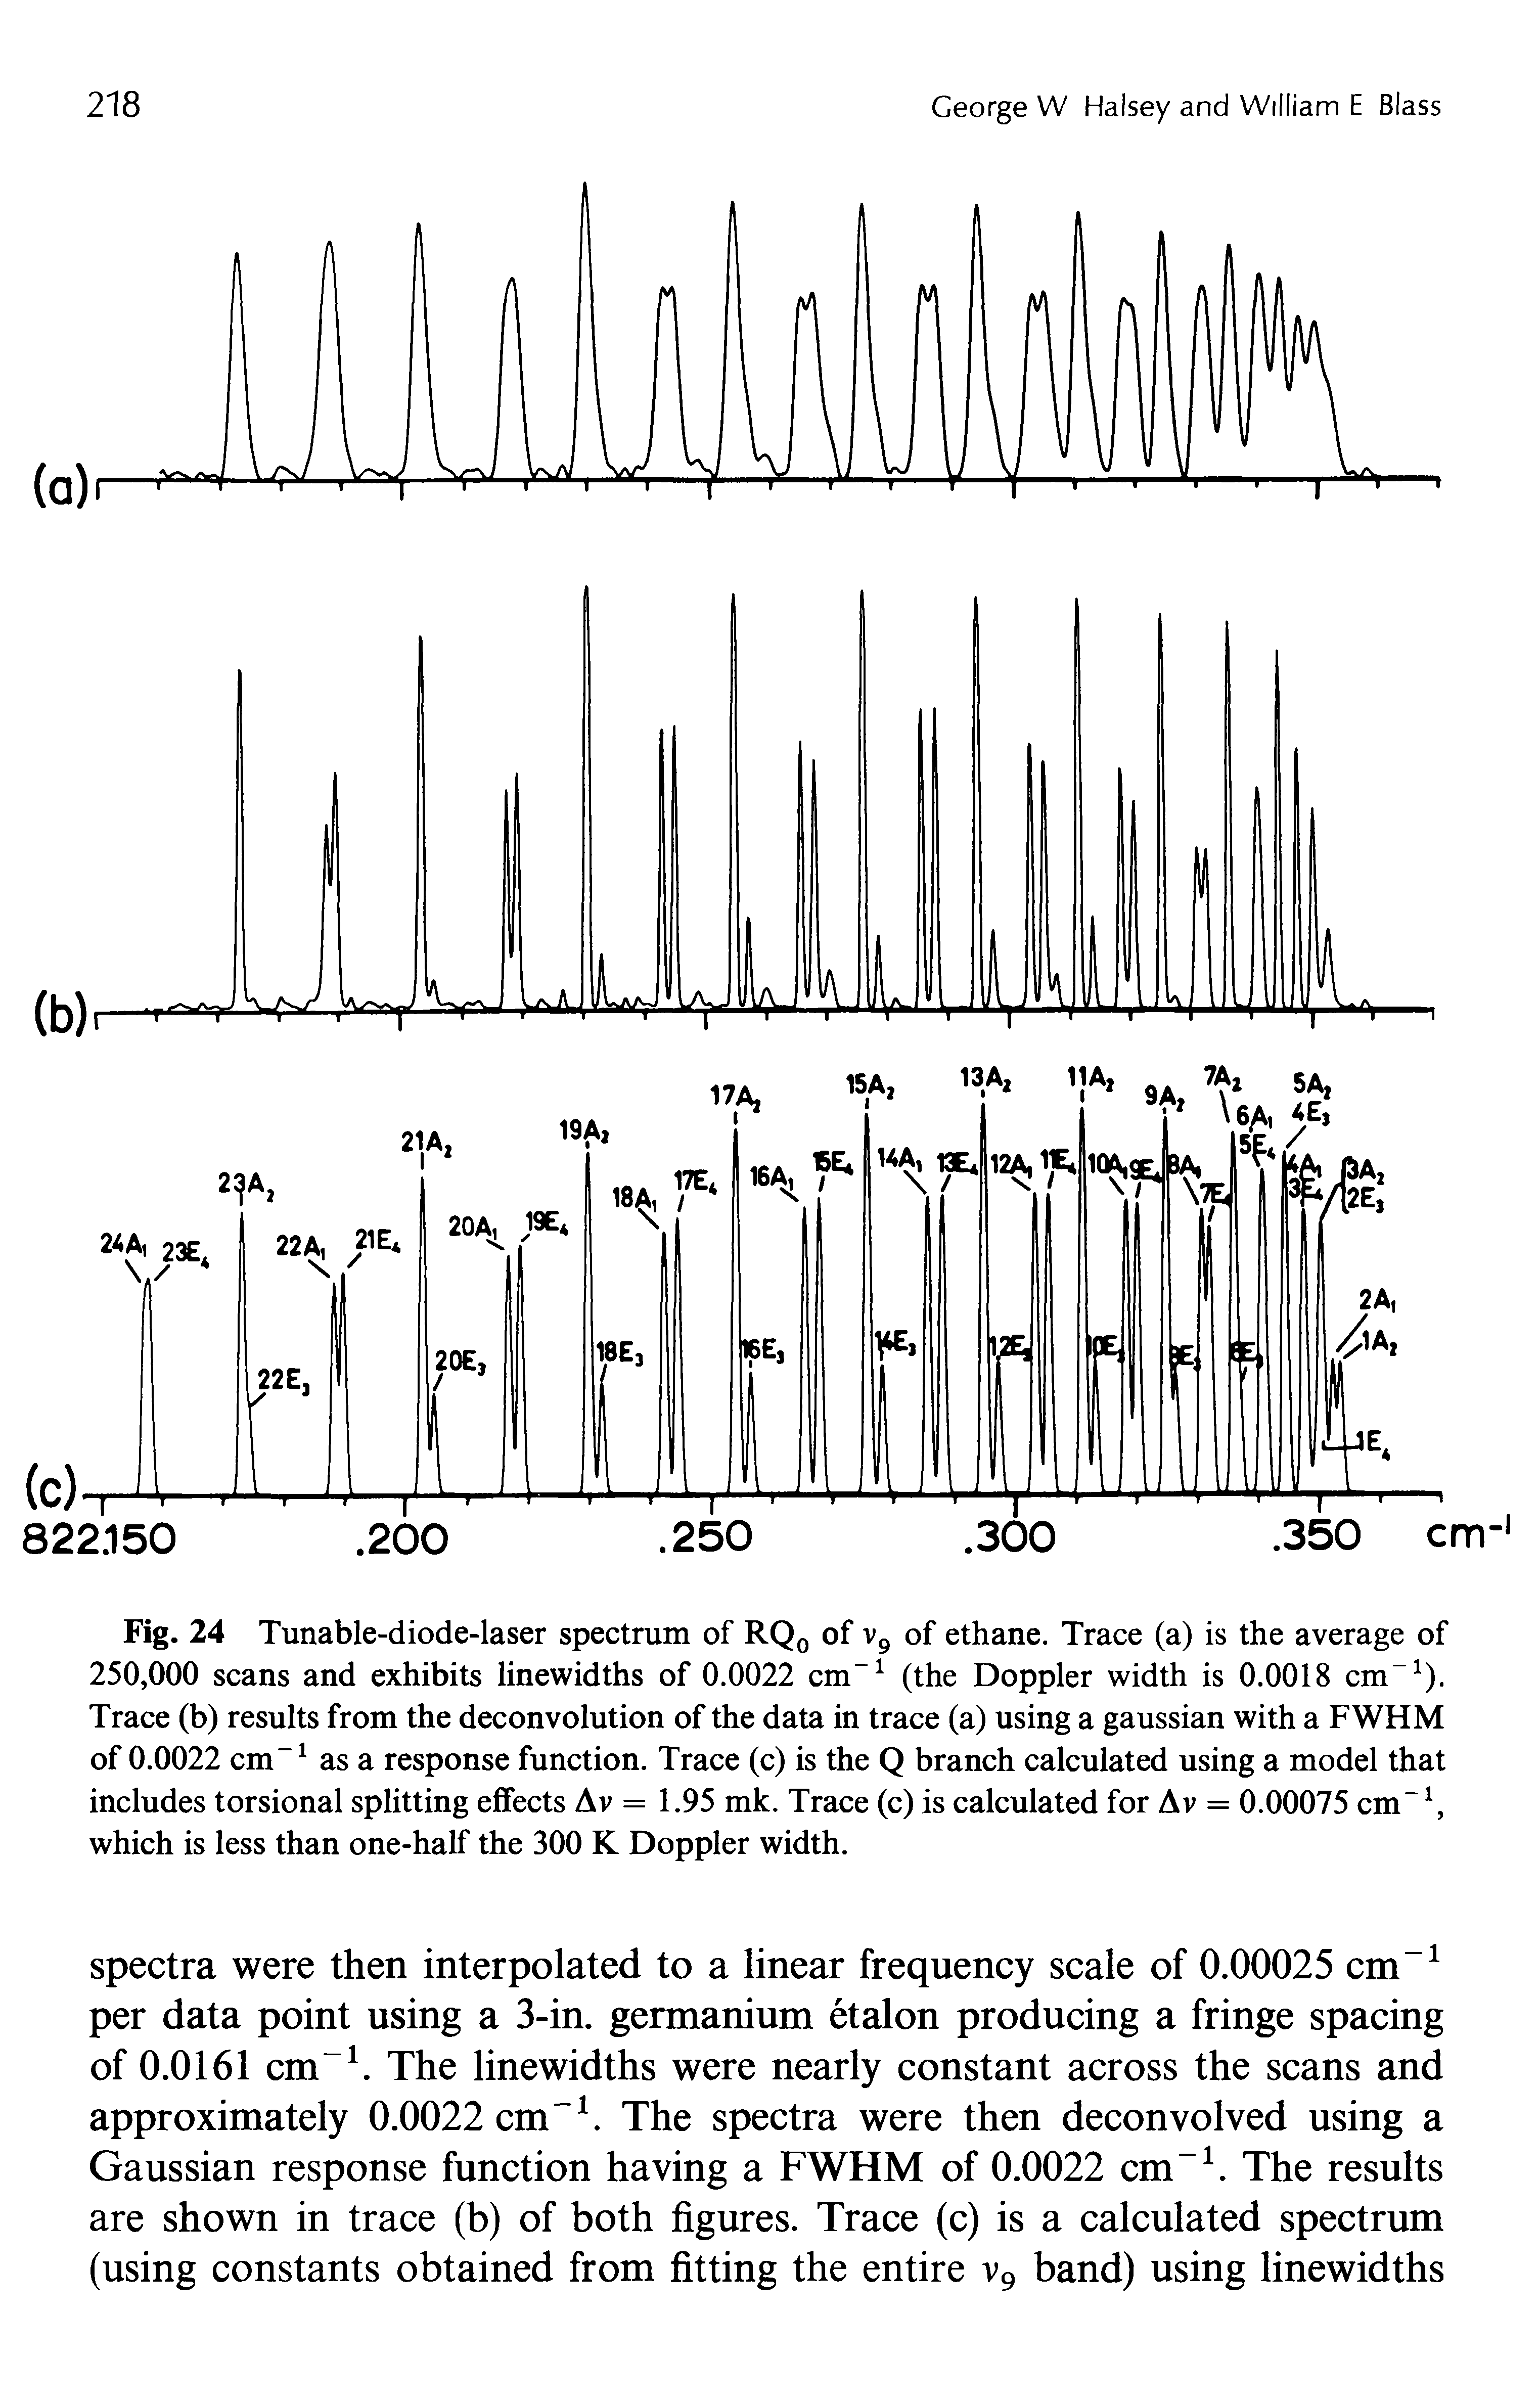 Fig. 24 Tunable-diode-laser spectrum of RQ0 of v9 of ethane. Trace (a) is the average of 250,000 scans and exhibits linewidths of 0.0022 cm-1 (the Doppler width is 0.0018 cm-1). Trace (b) results from the deconvolution of the data in trace (a) using a gaussian with a FWHM of 0.0022 cm-1 as a response function. Trace (c) is the Q branch calculated using a model that includes torsional splitting effects Av = 1.95 mk. Trace (c) is calculated for Av = 0.00075 cm-1, which is less than one-half the 300 K Doppler width.